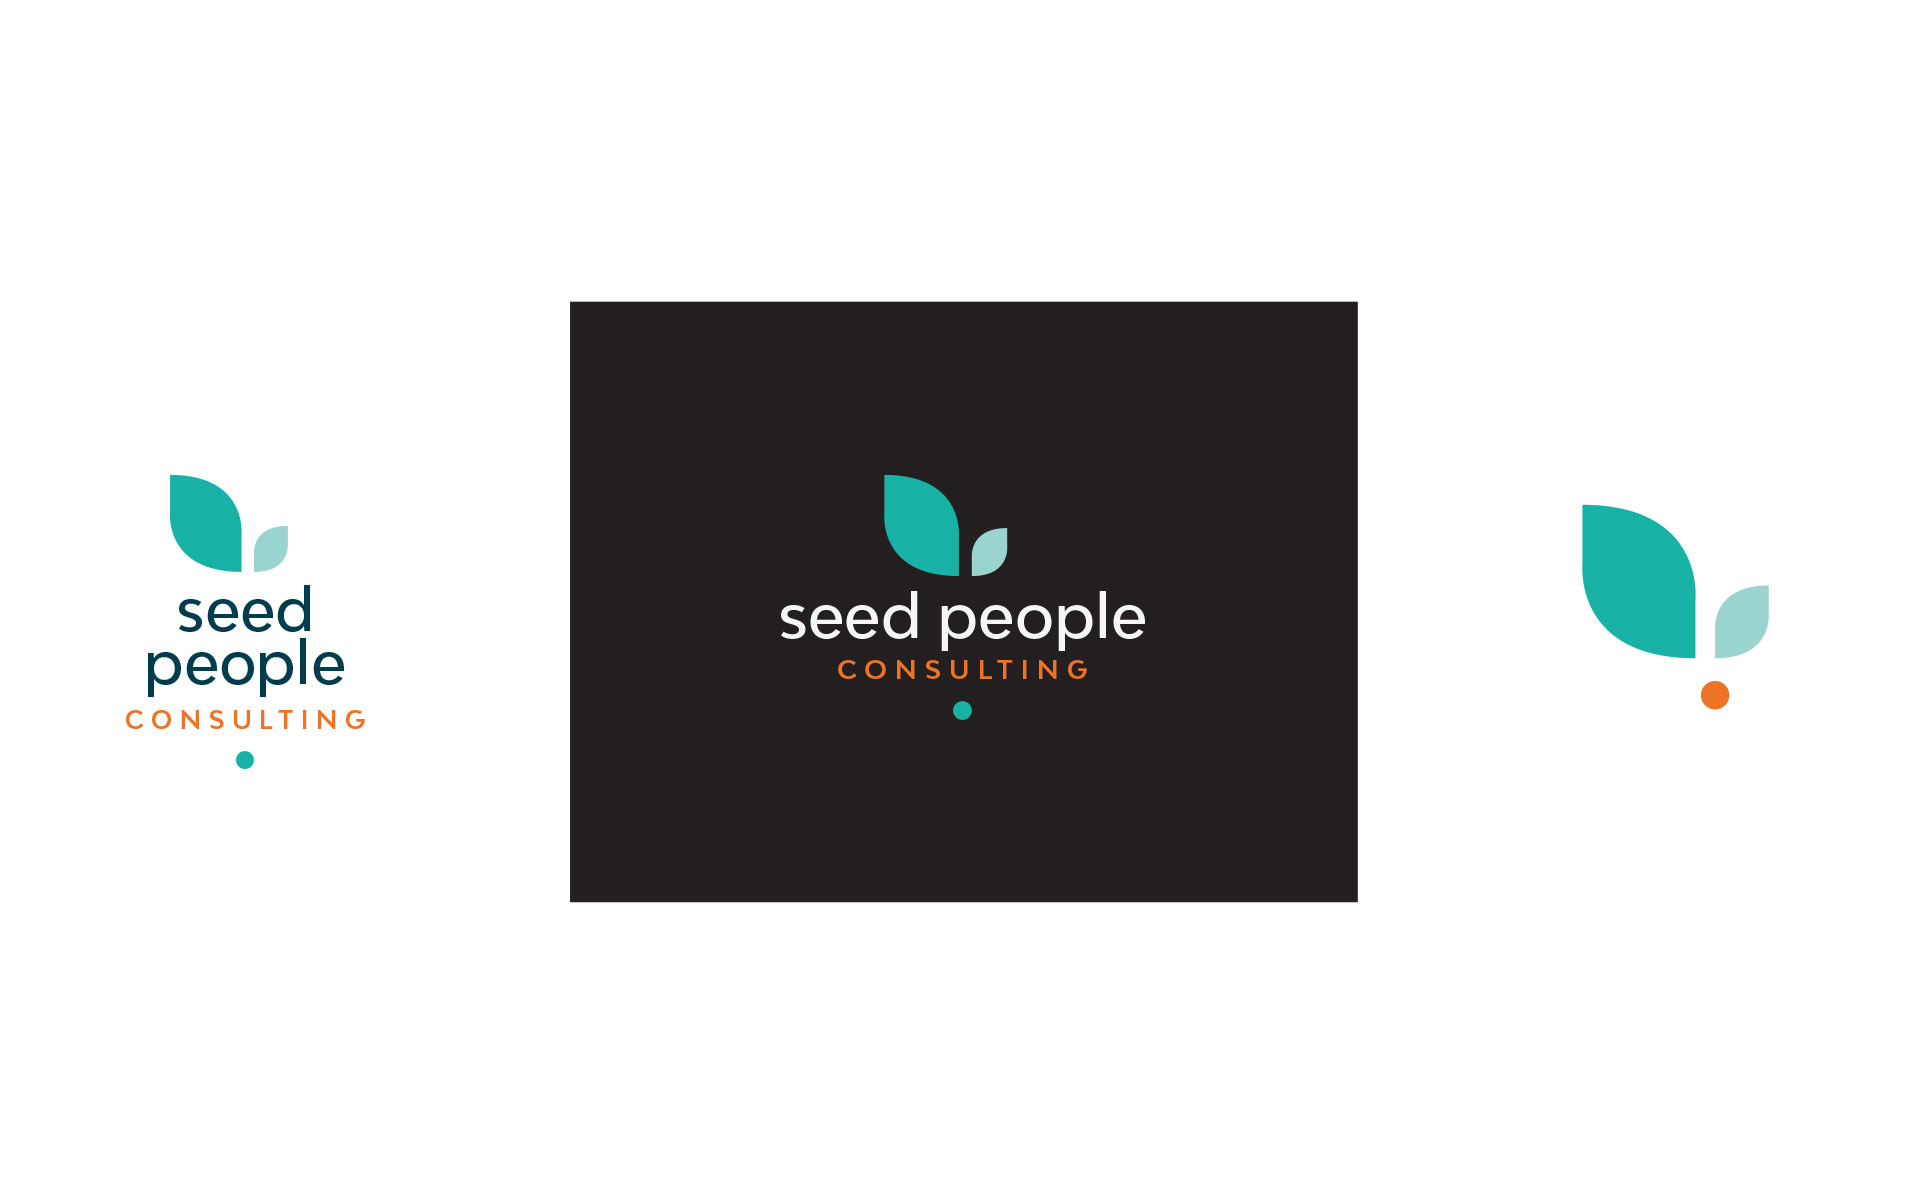 Seed People Consulting rebrand designed by Amy at Yellow Sunday